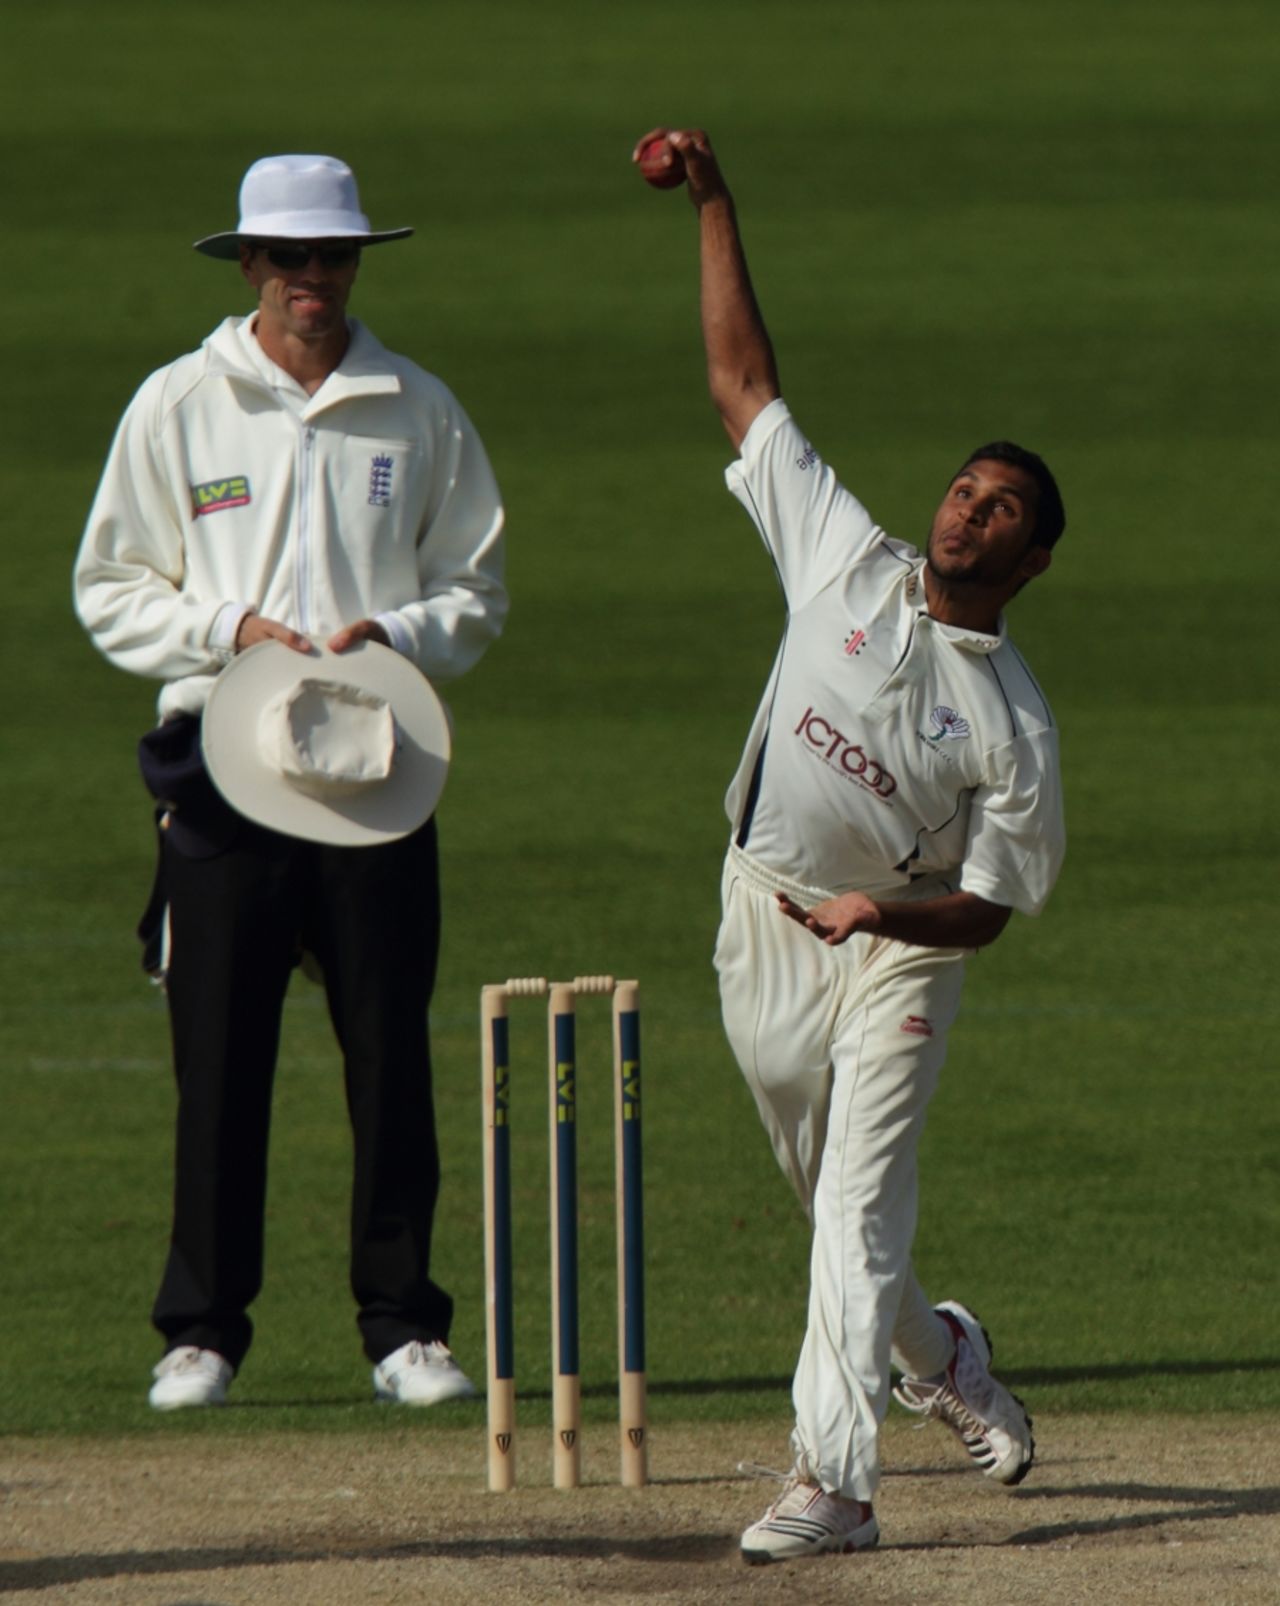 Adil Rashid recorded match figures of 11 for 114 in Yorkshire's nine-wicket win, Worcestershire v Yorkshire, County Championship, Worcester, April 10 2011